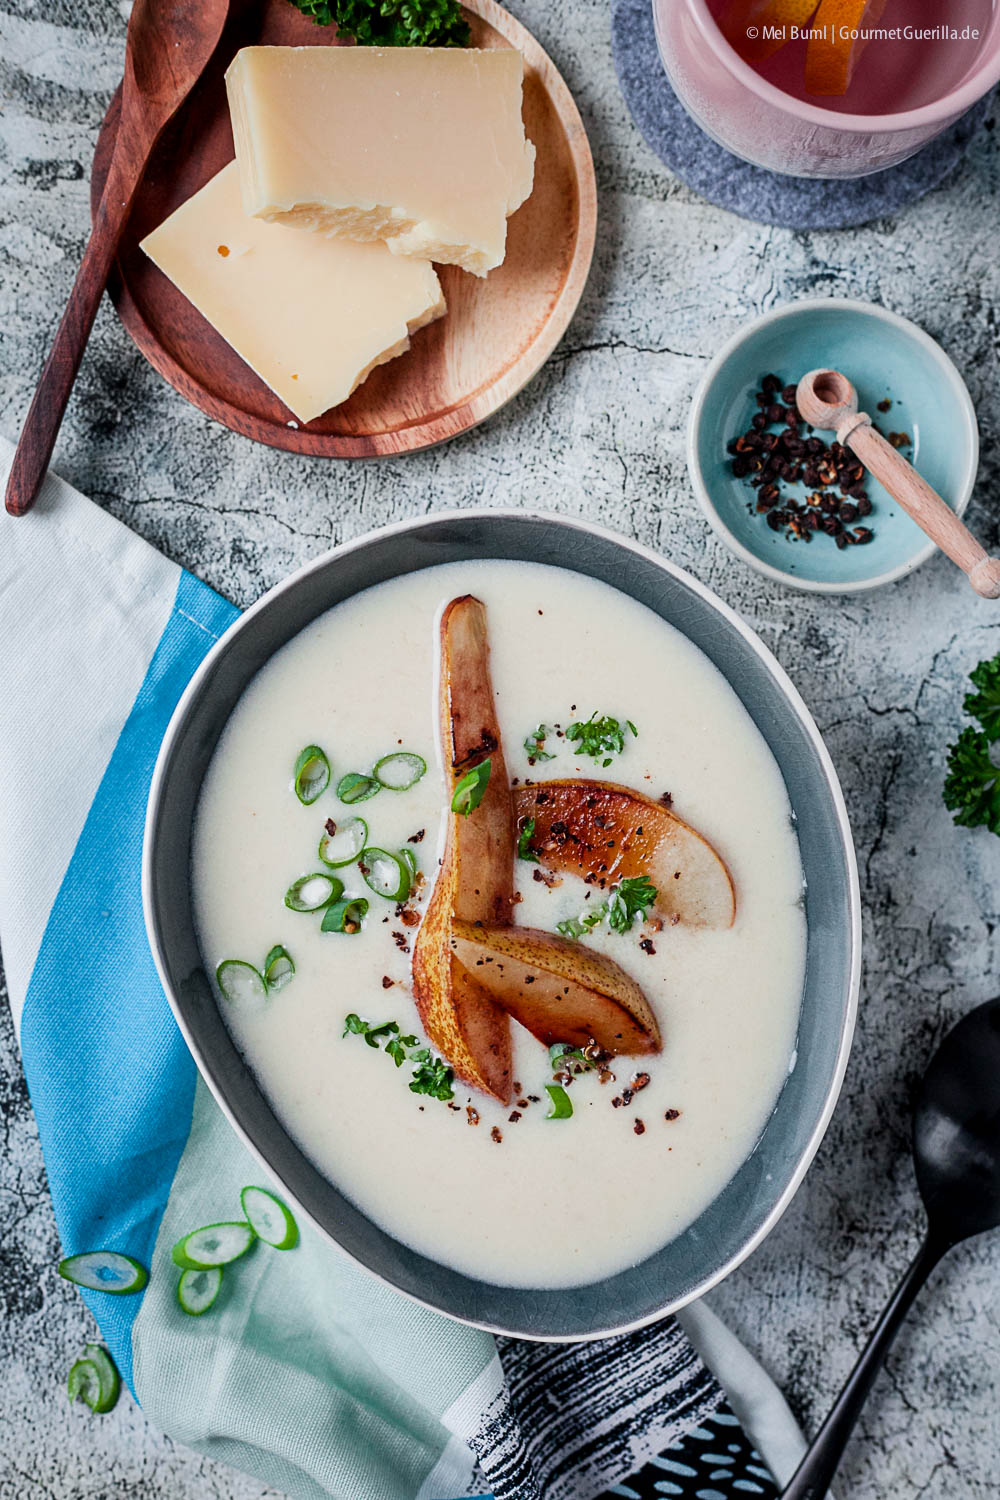  Fast cheese soup with mountain cheese, roasted pears and Szechuan pepper under 500 calories | GourmetGuerilla.com 